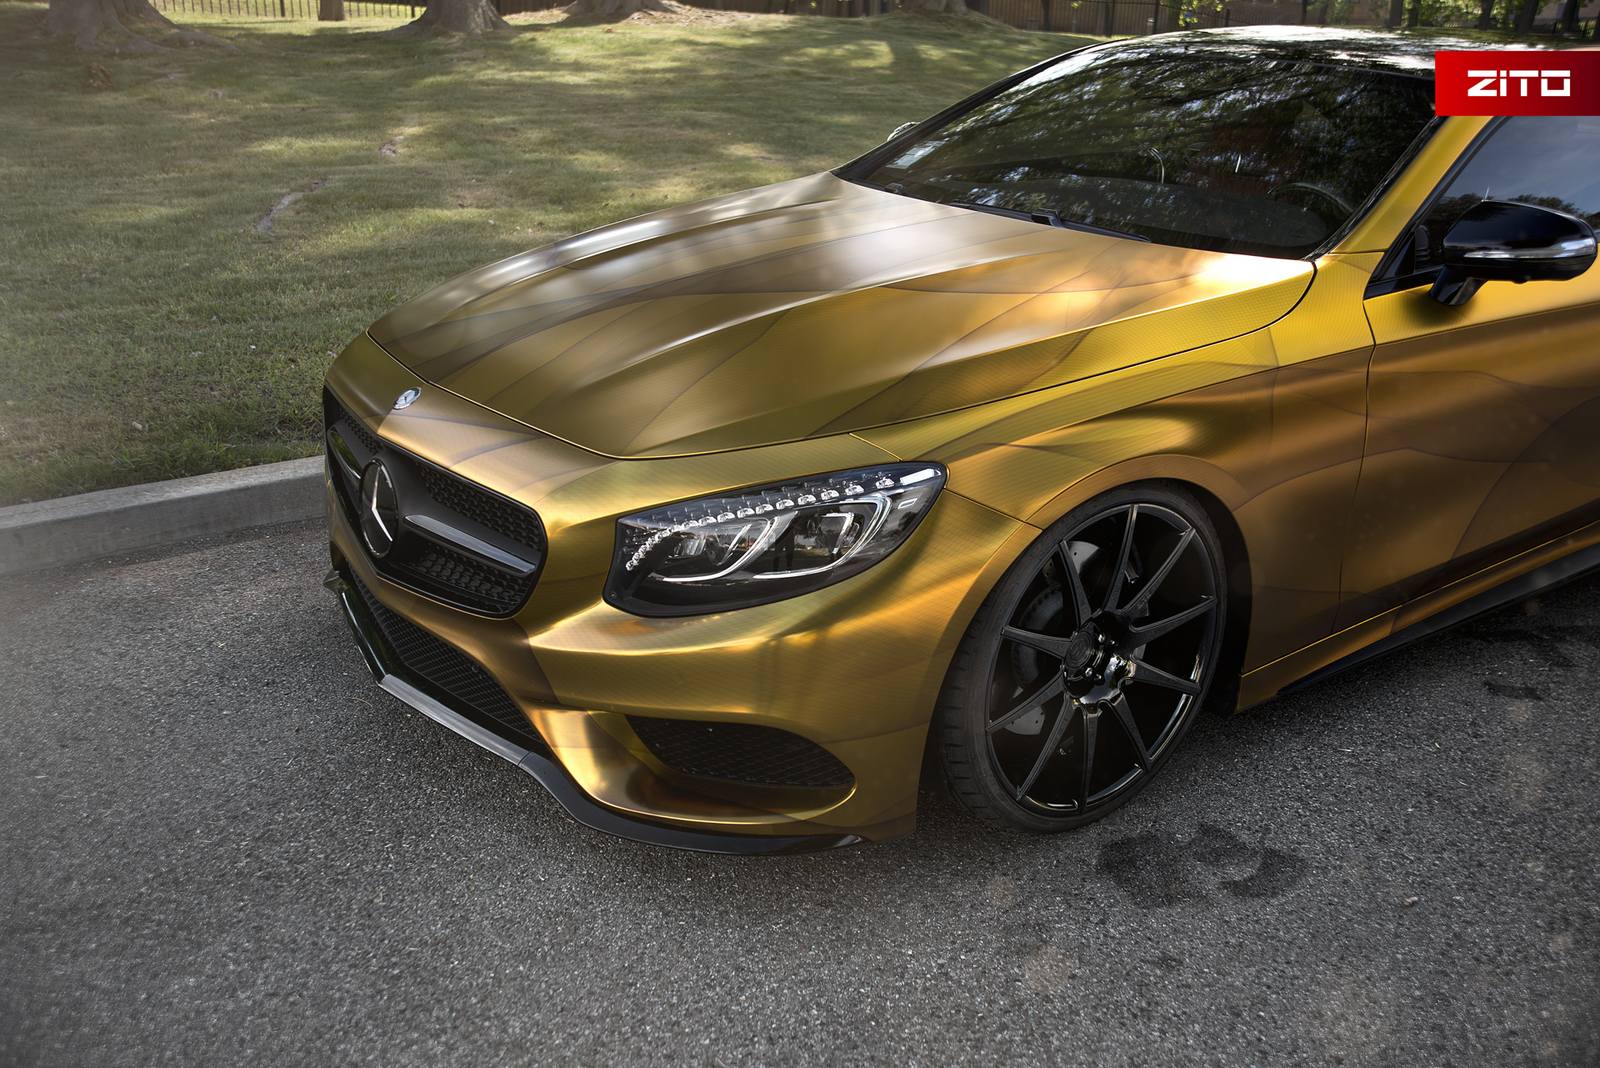 Gold Wrapped Mercedes Benz S500 Coupe With Zito Wheels Gtspirit